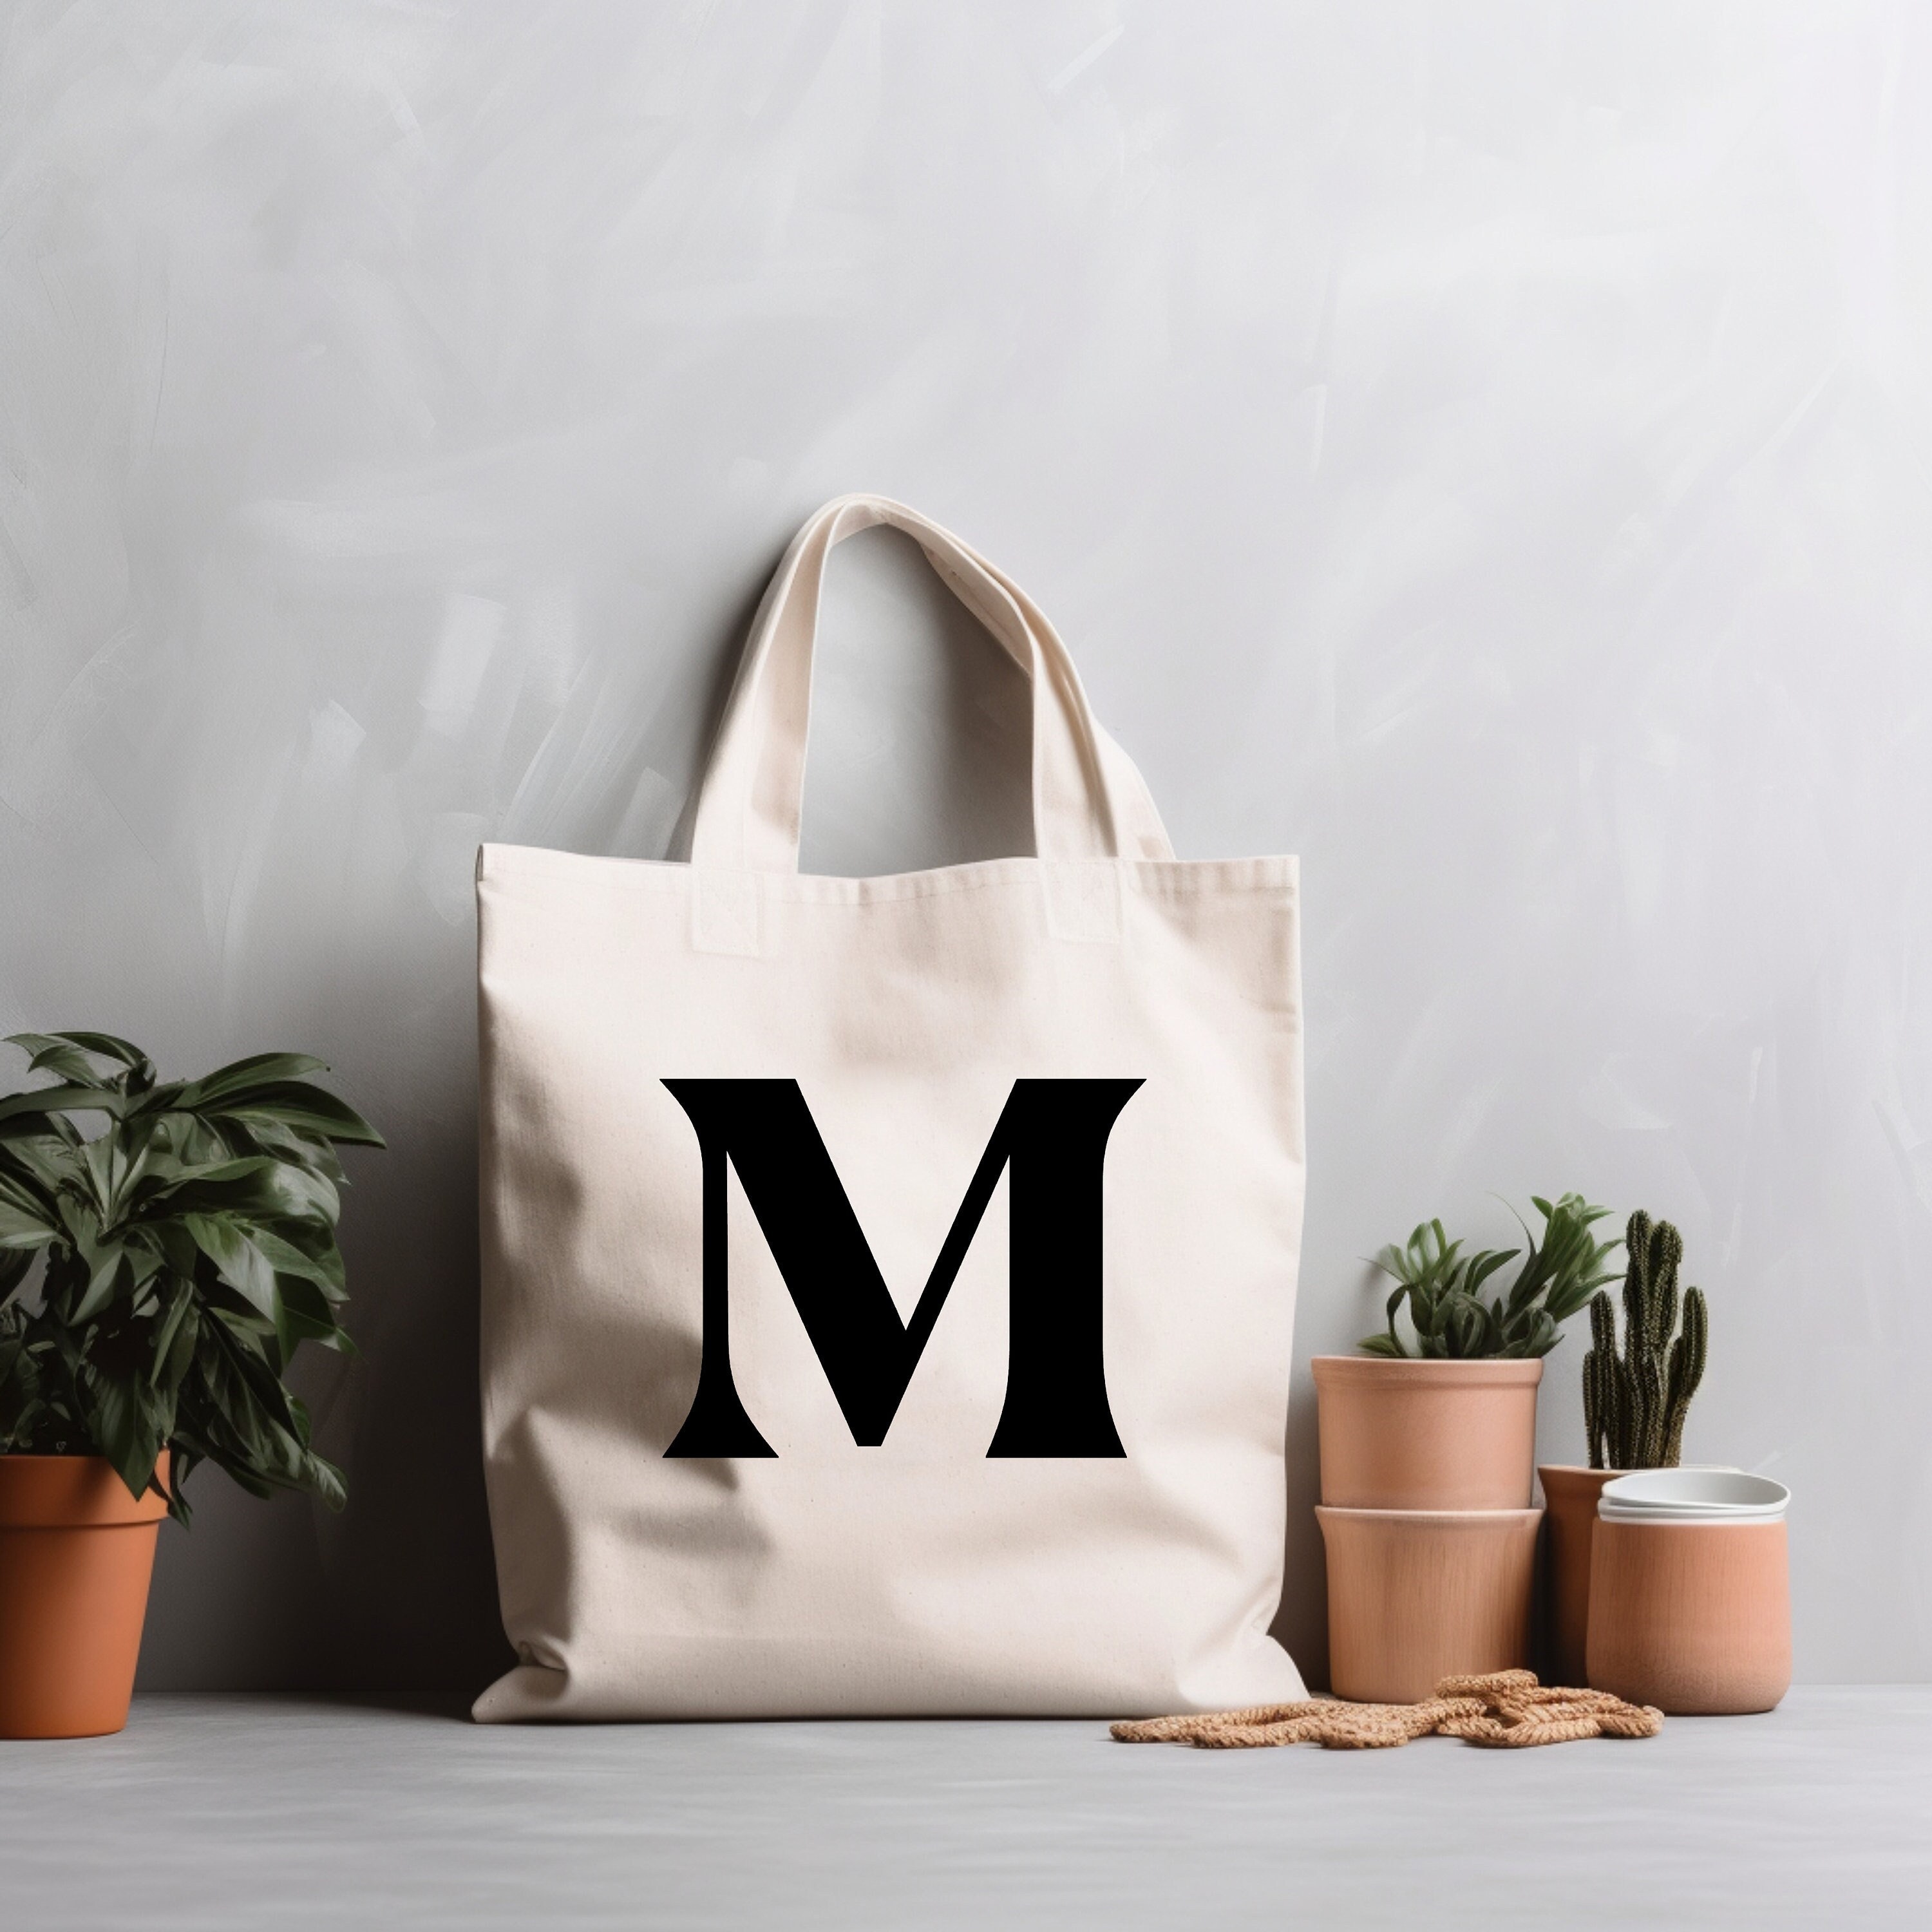  TOPDesign Initial Jute/Canvas Tote Bag, Personalized